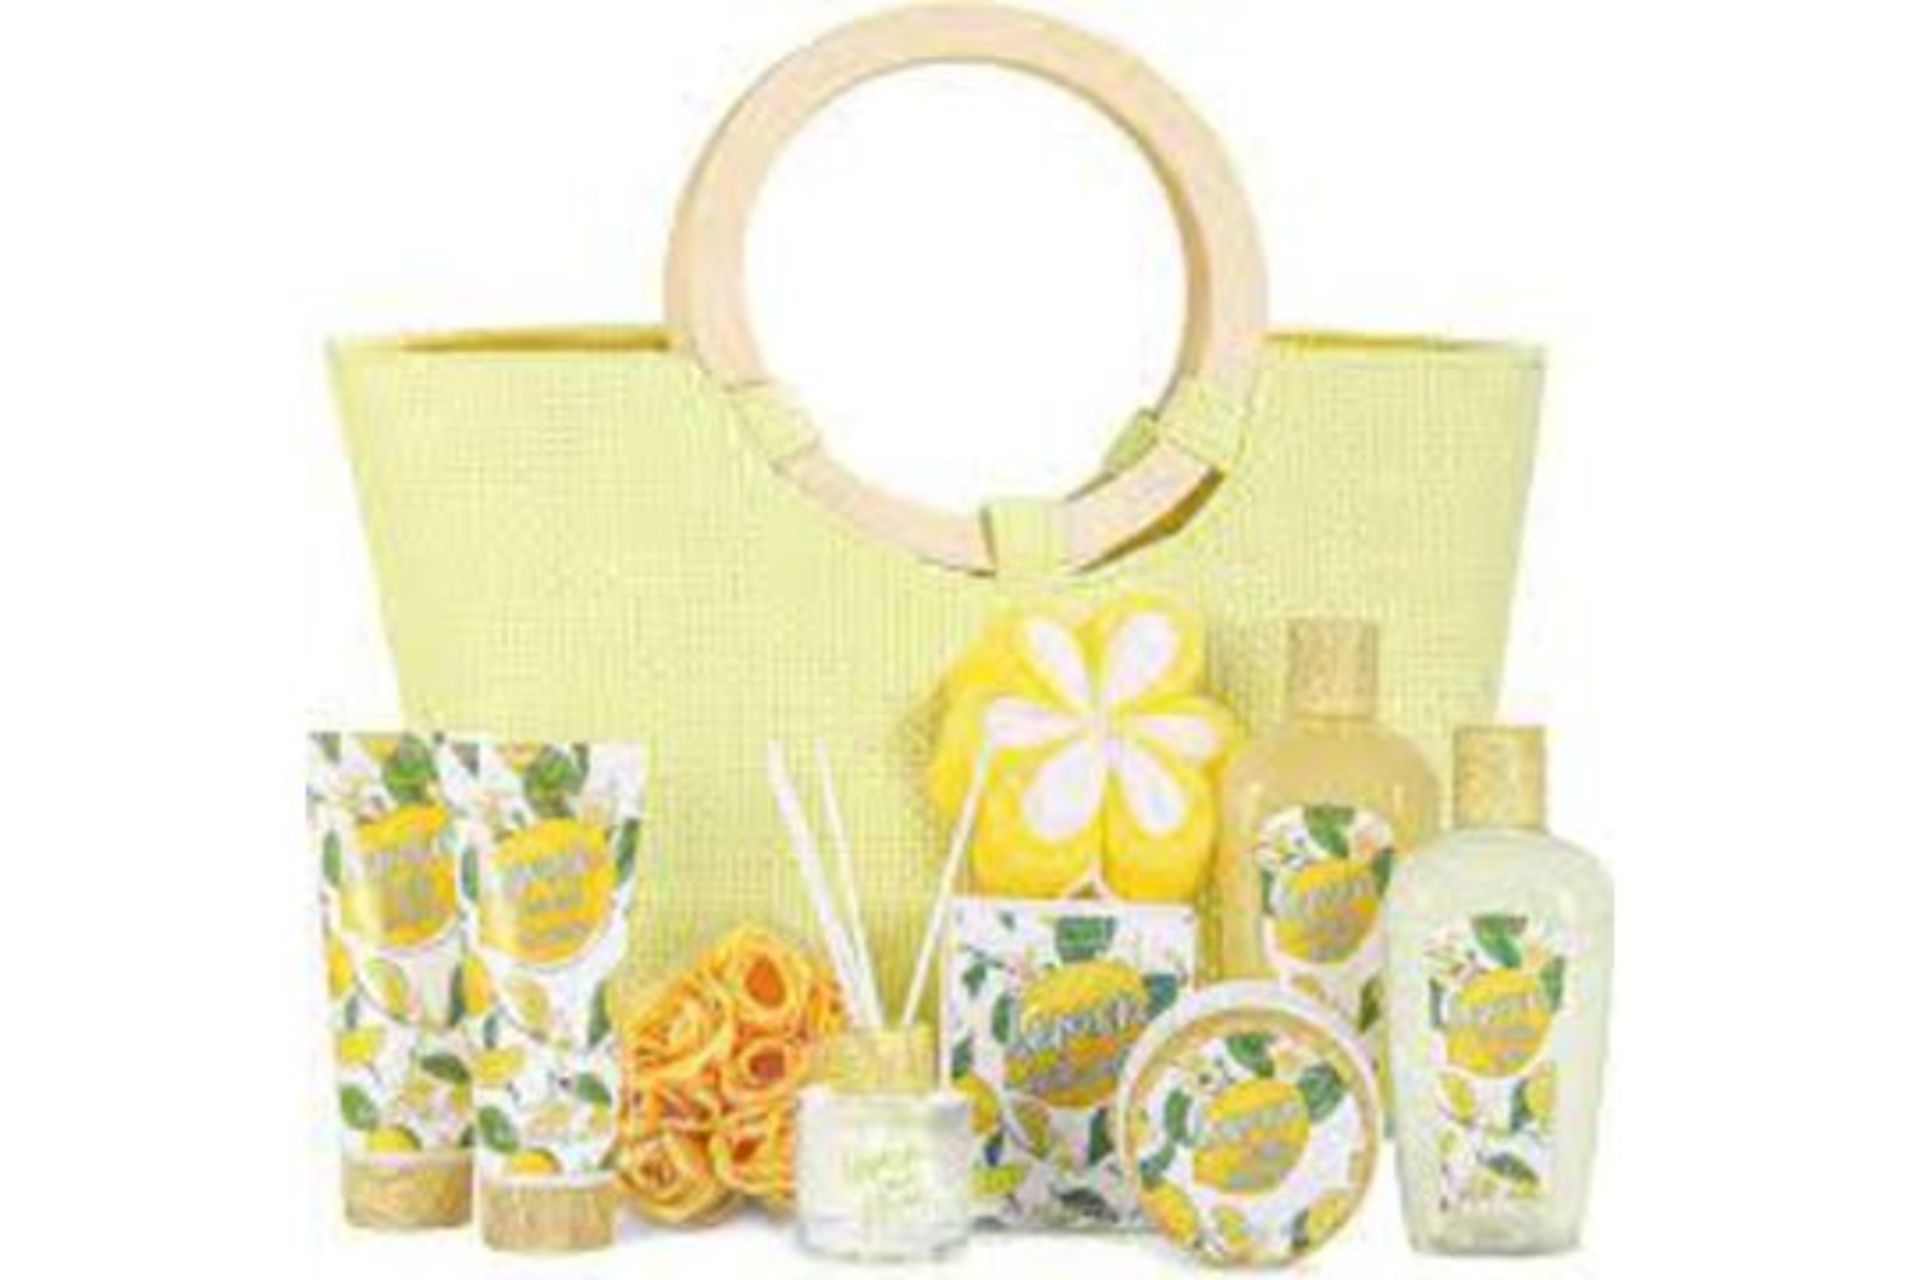 4 X NEW PACKAGED Lemon Everyday Bath Set Tote Gift Sets. (ROW11MID). Home Spa Kit Meets Your All